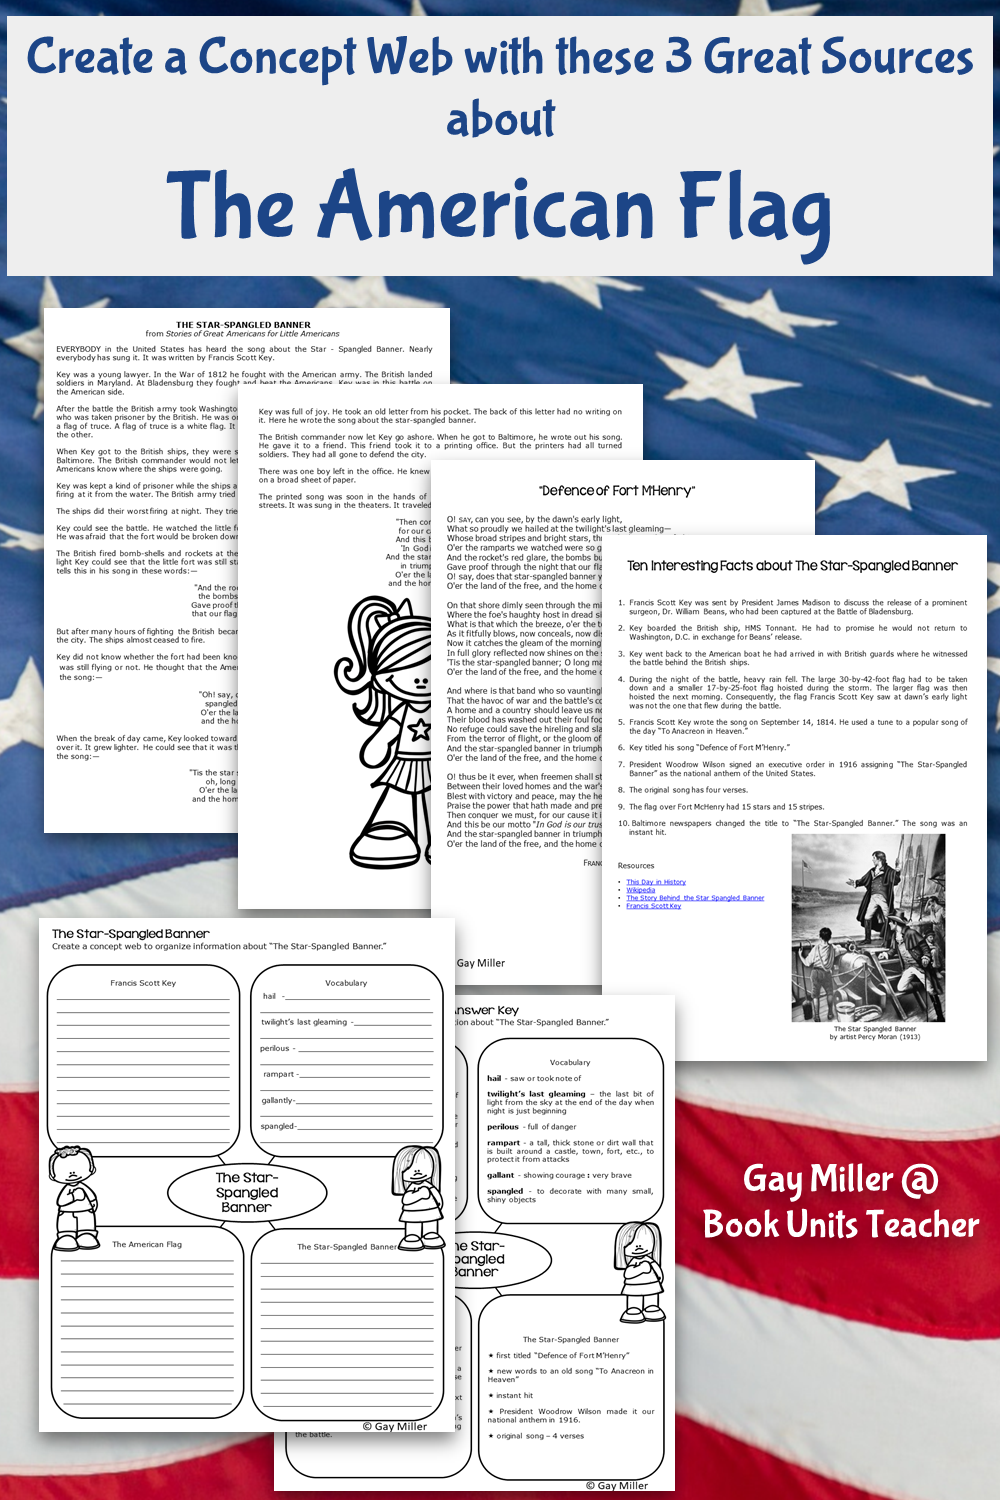 Using Francis Scott Key and the Story of the Star-Spangled Banner to Create a Concept Web